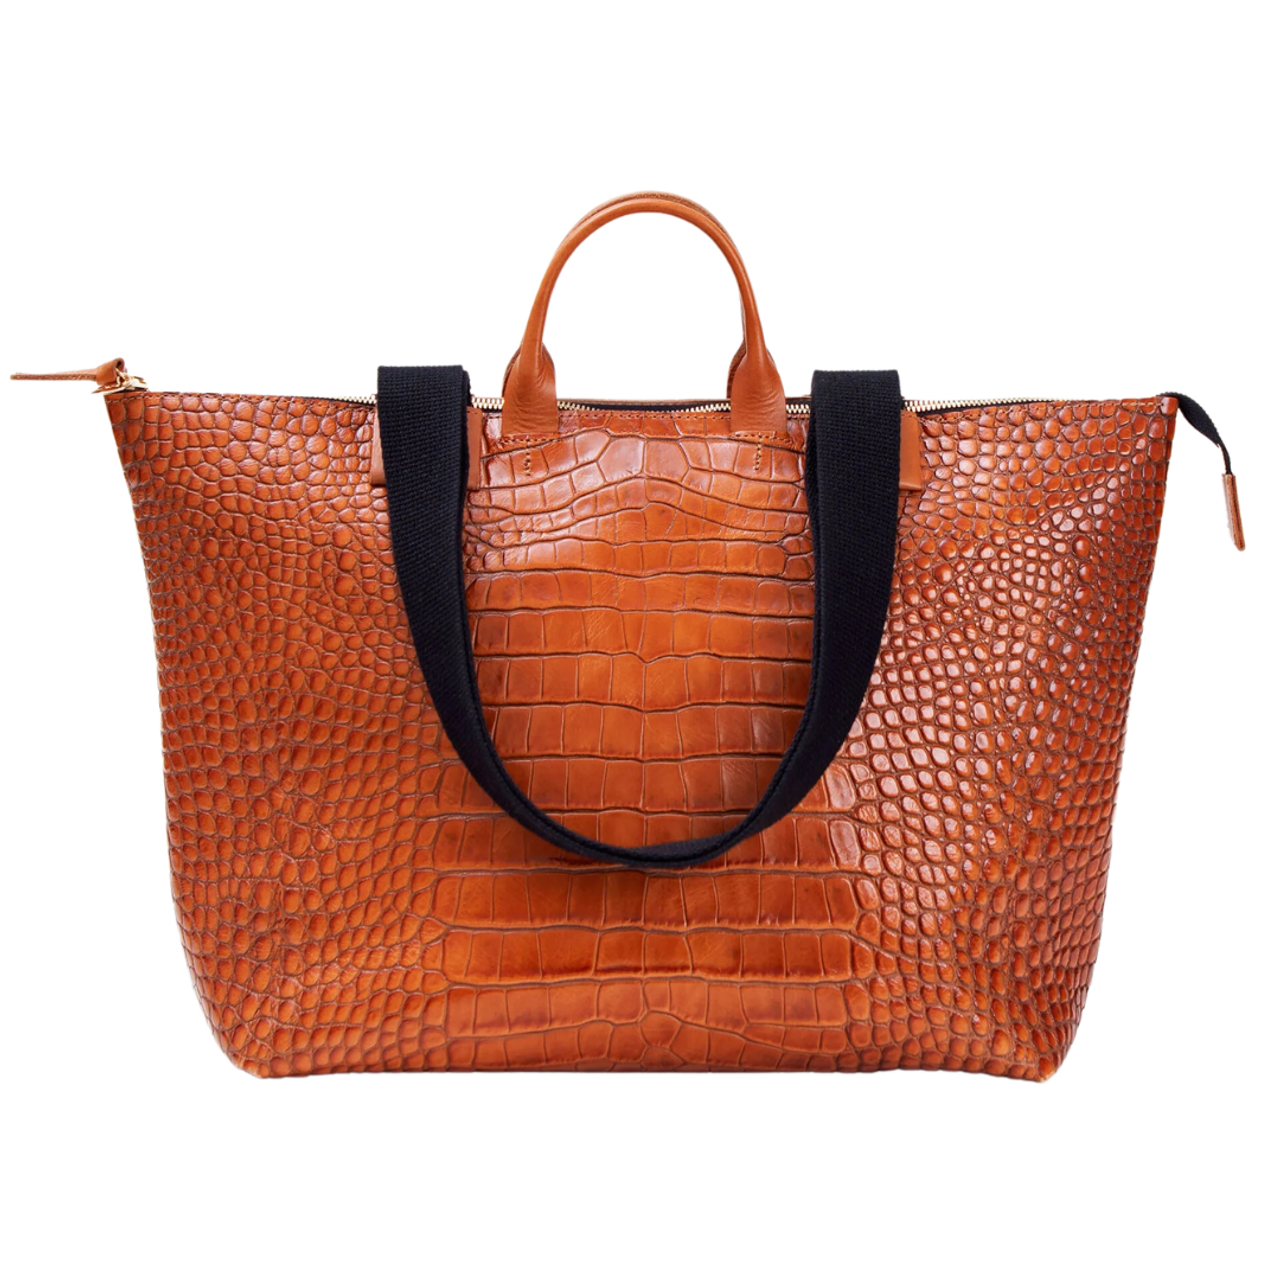 Clare V. Le Zip Leather Tote Bag